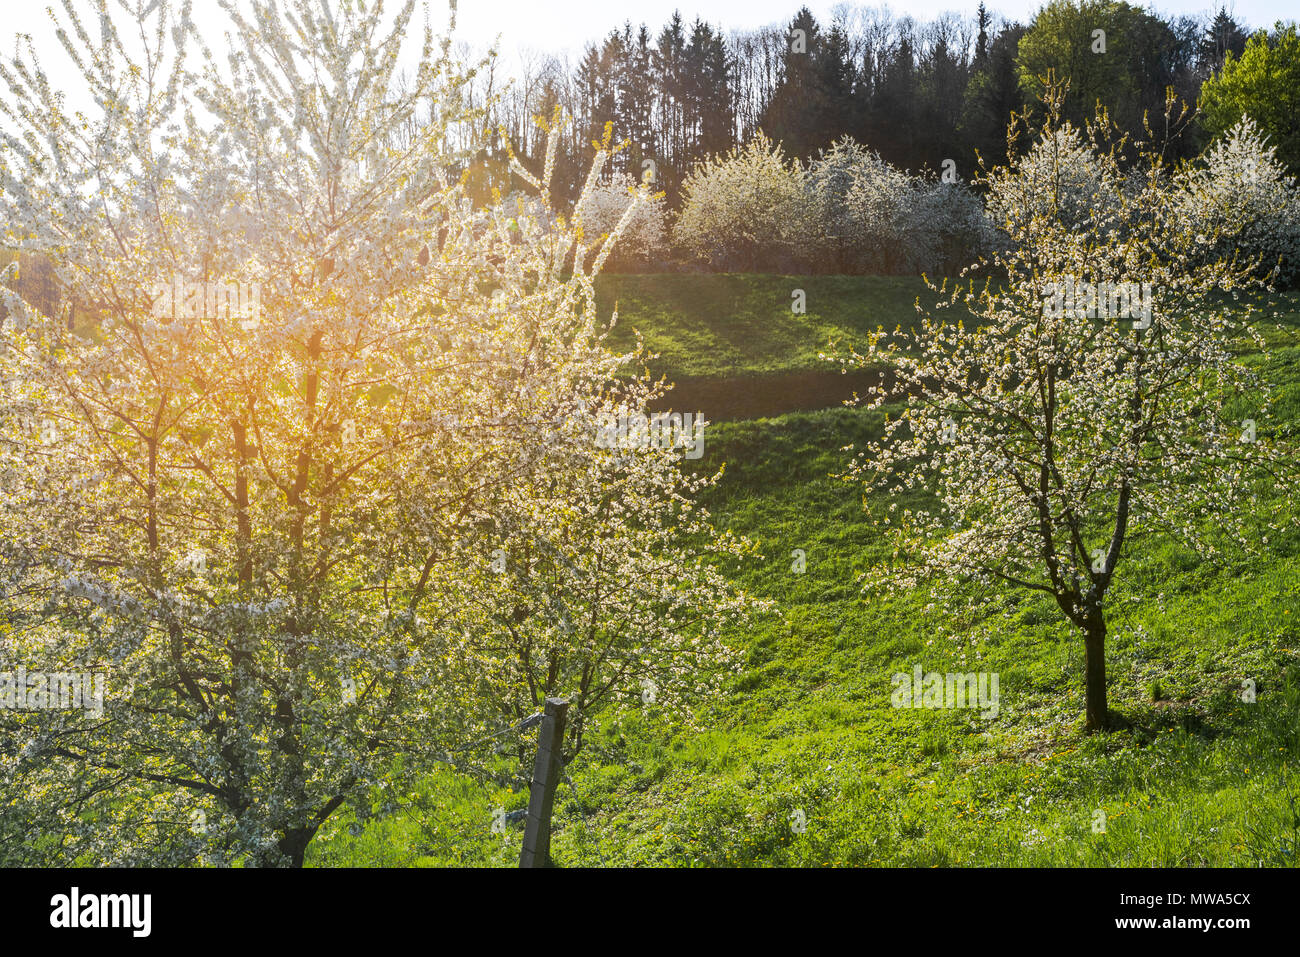 Spring in the foothills of the Black Forest, resort town, Sasbachwalden, Germany, vineyard and blooming fruit trees, Black Forest kirsch trees Stock Photo